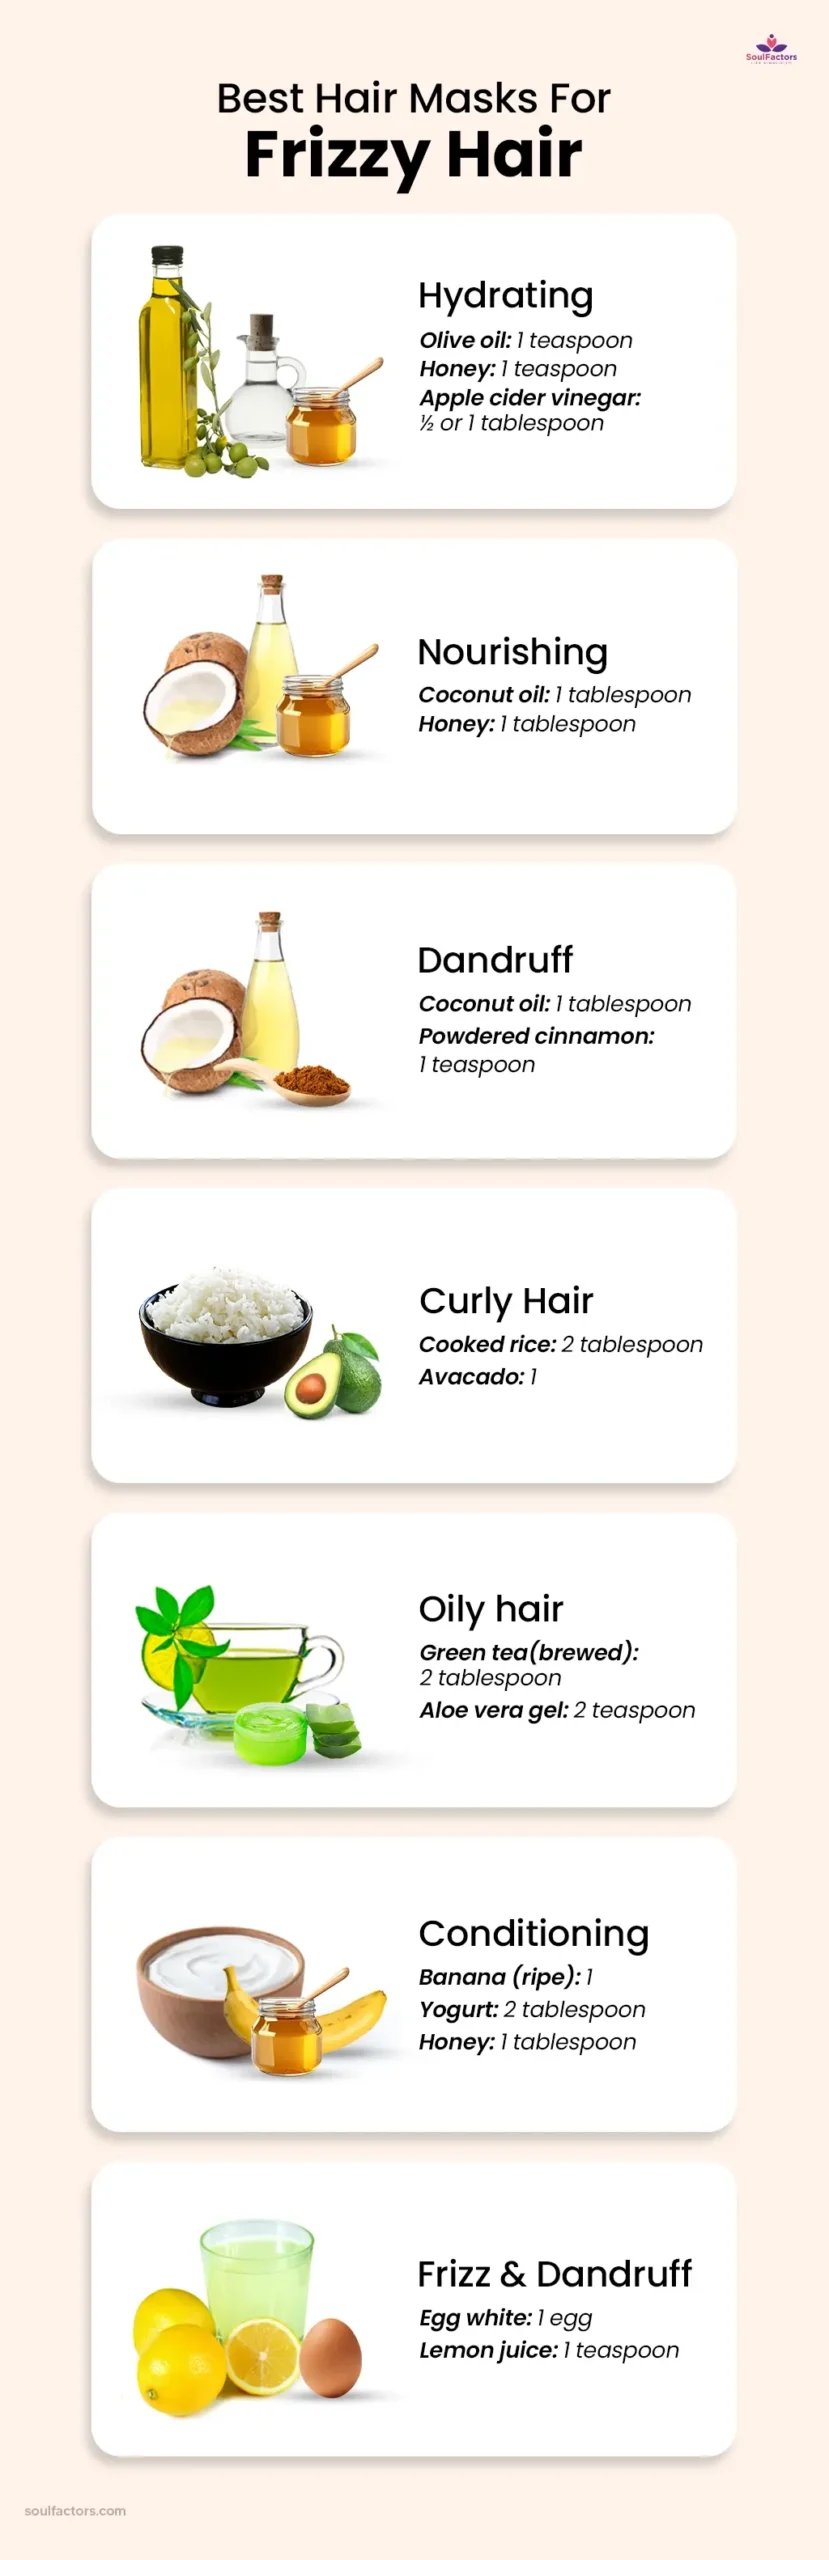 Best Hair Masks for Frizzy Hair